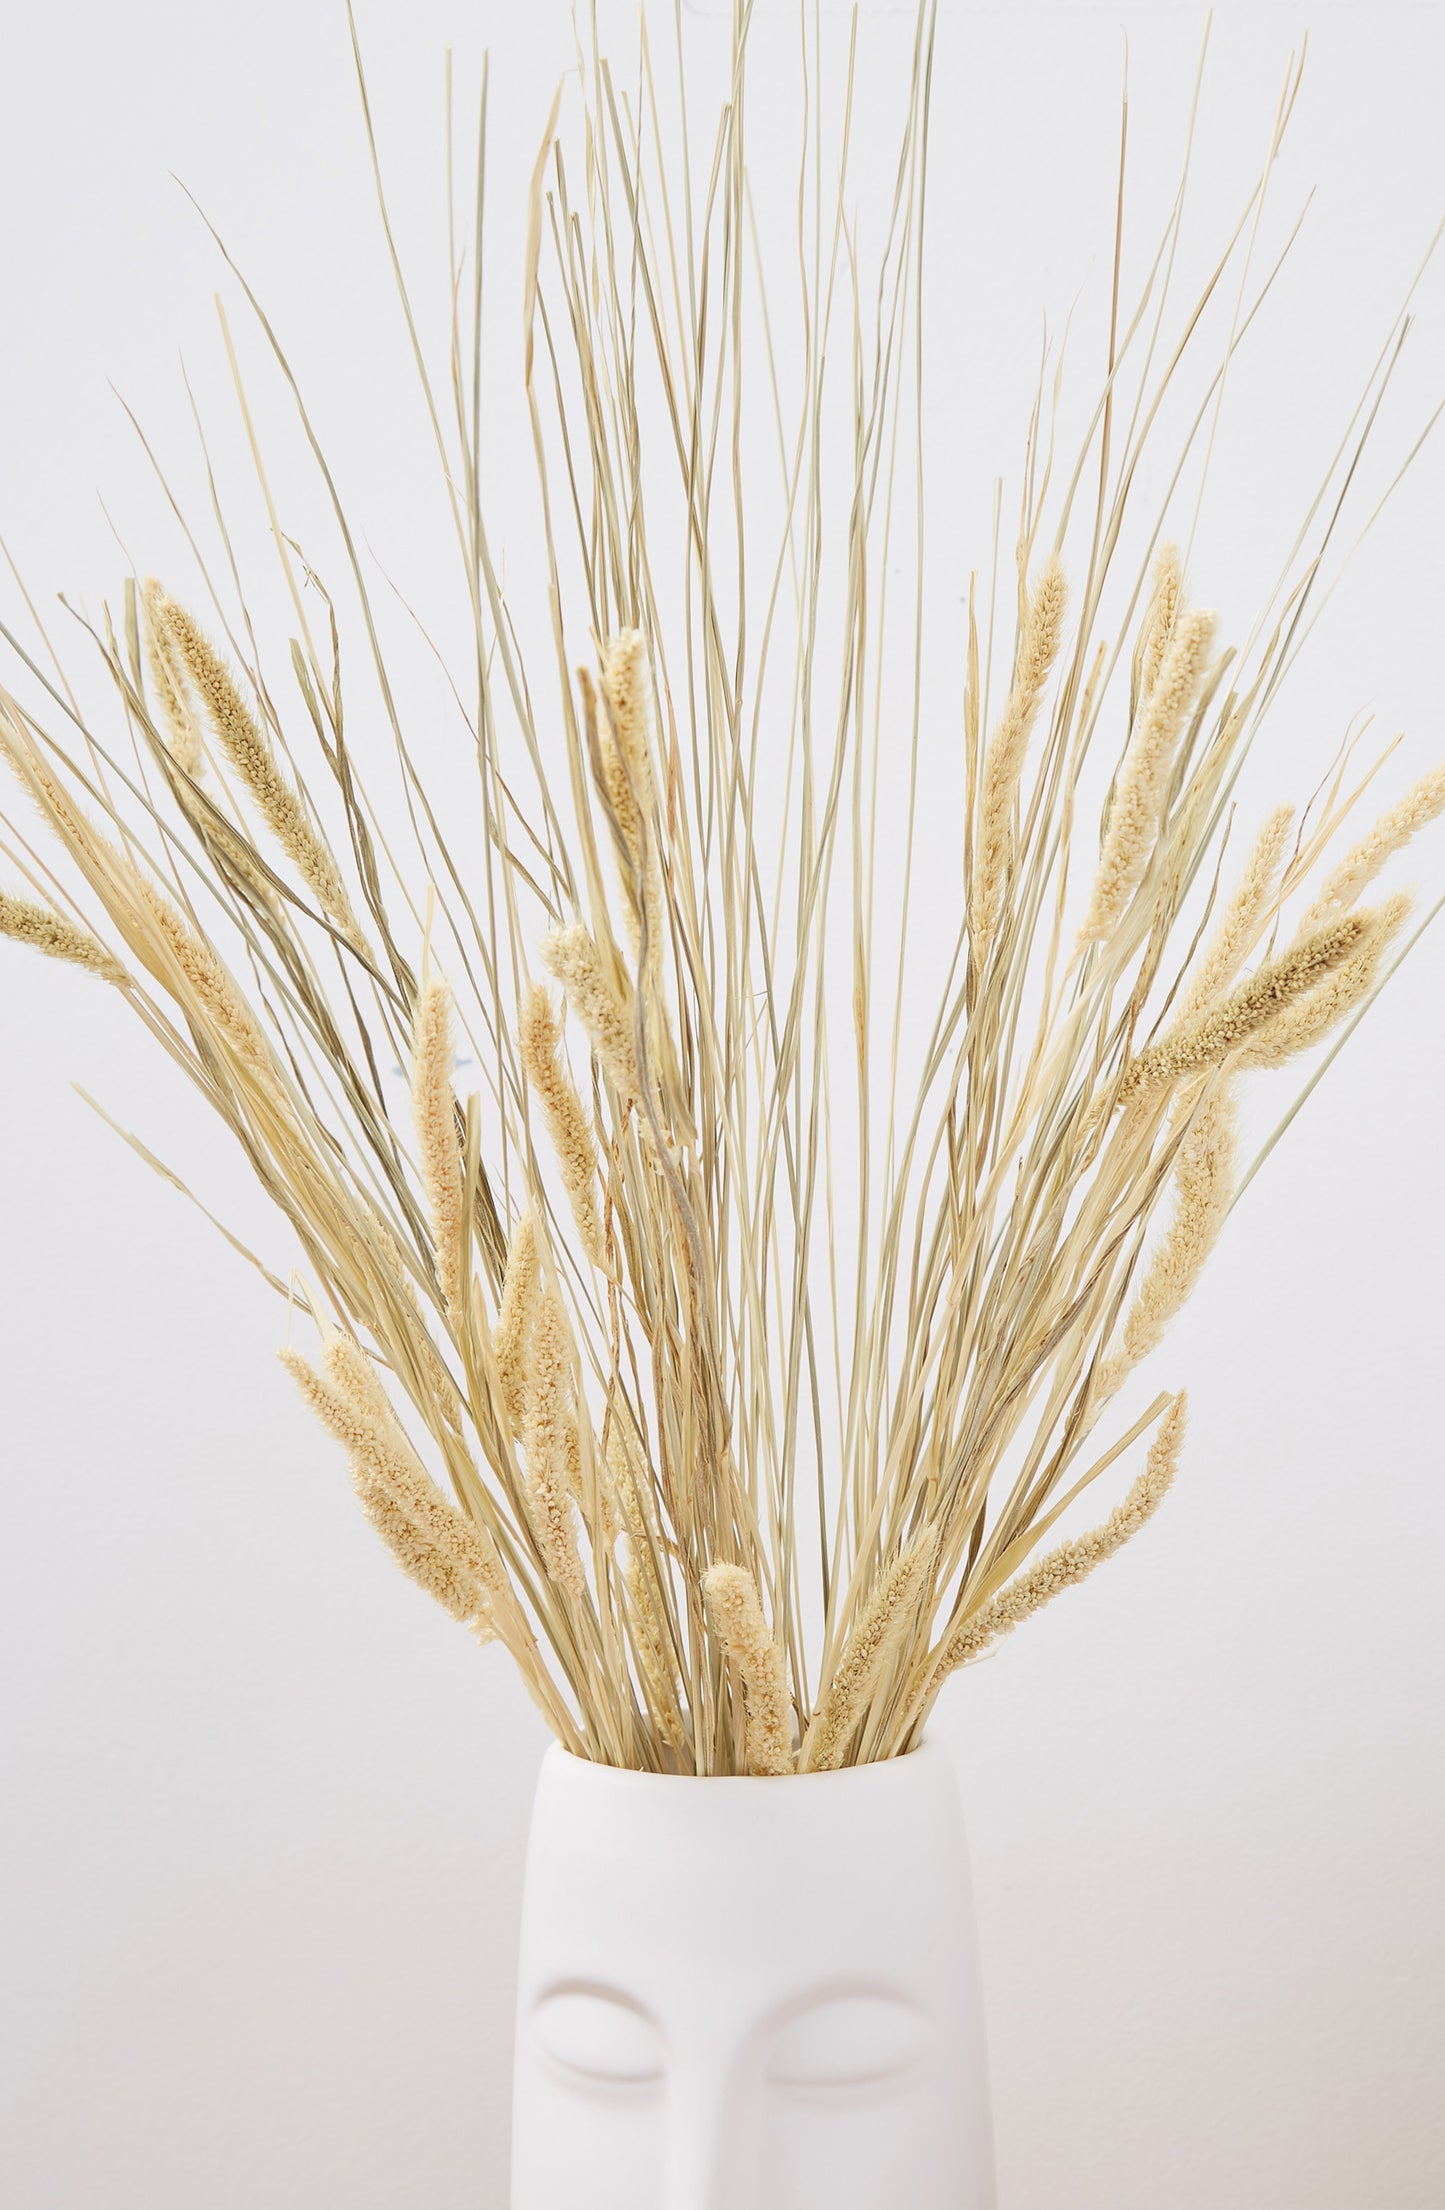 Dried Cats Tail Grass